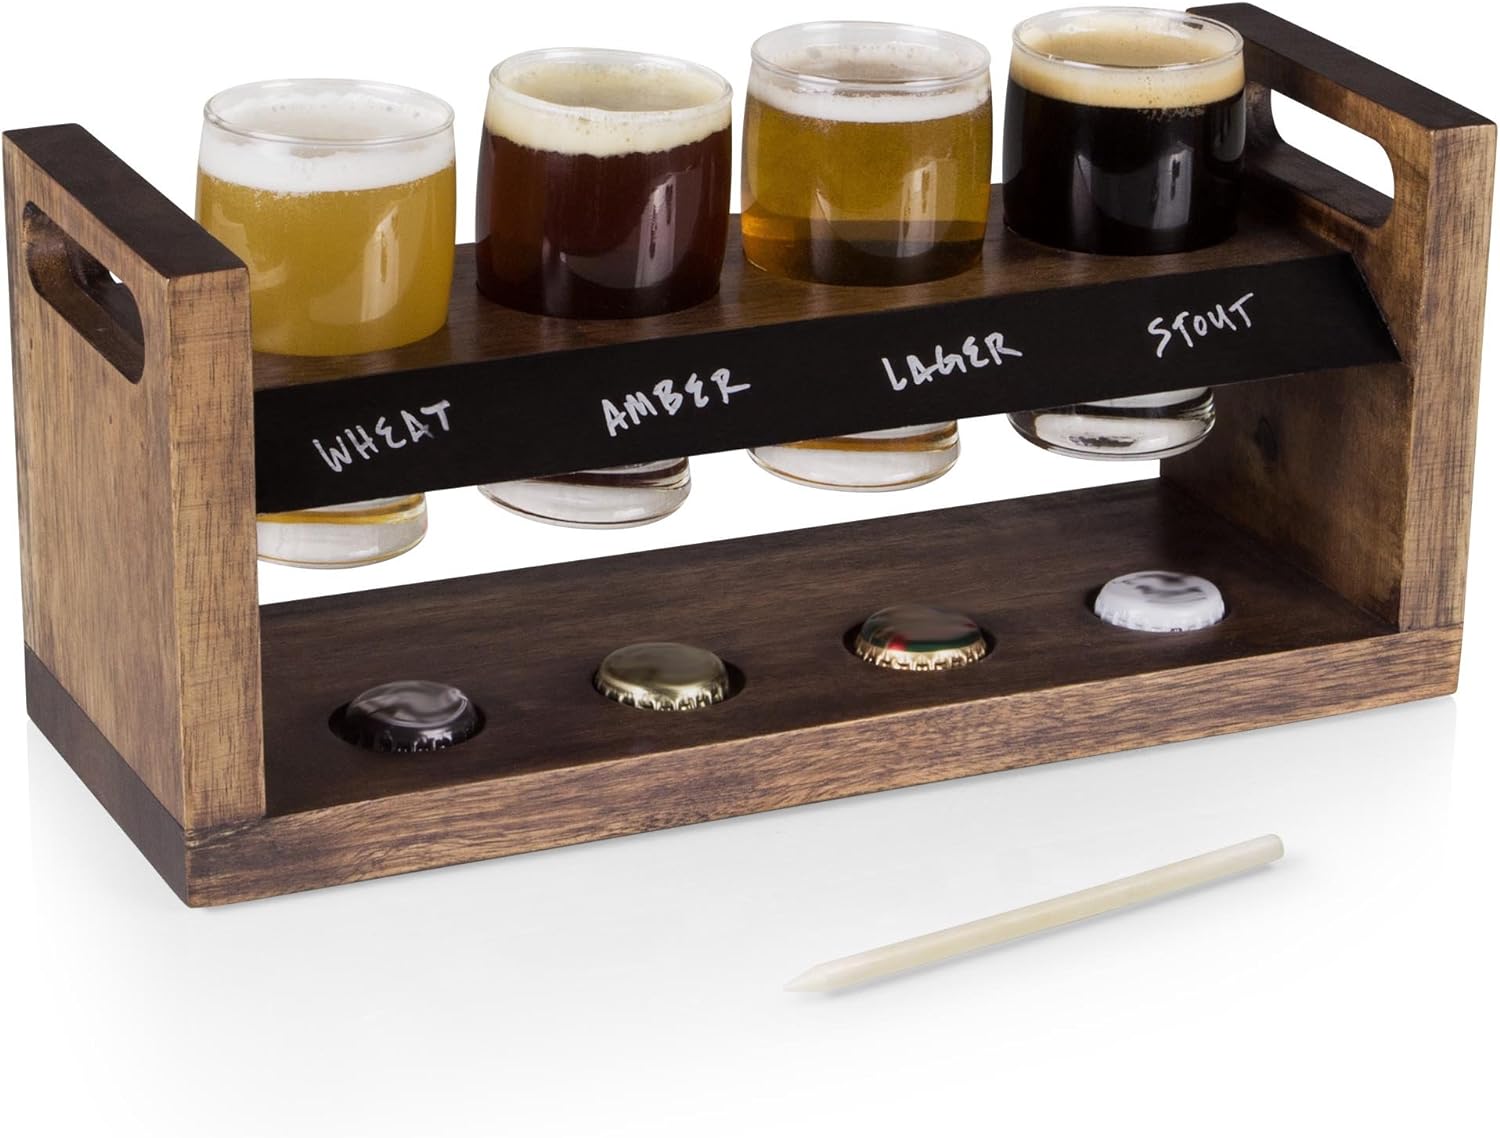 A picture of a flight of four beers